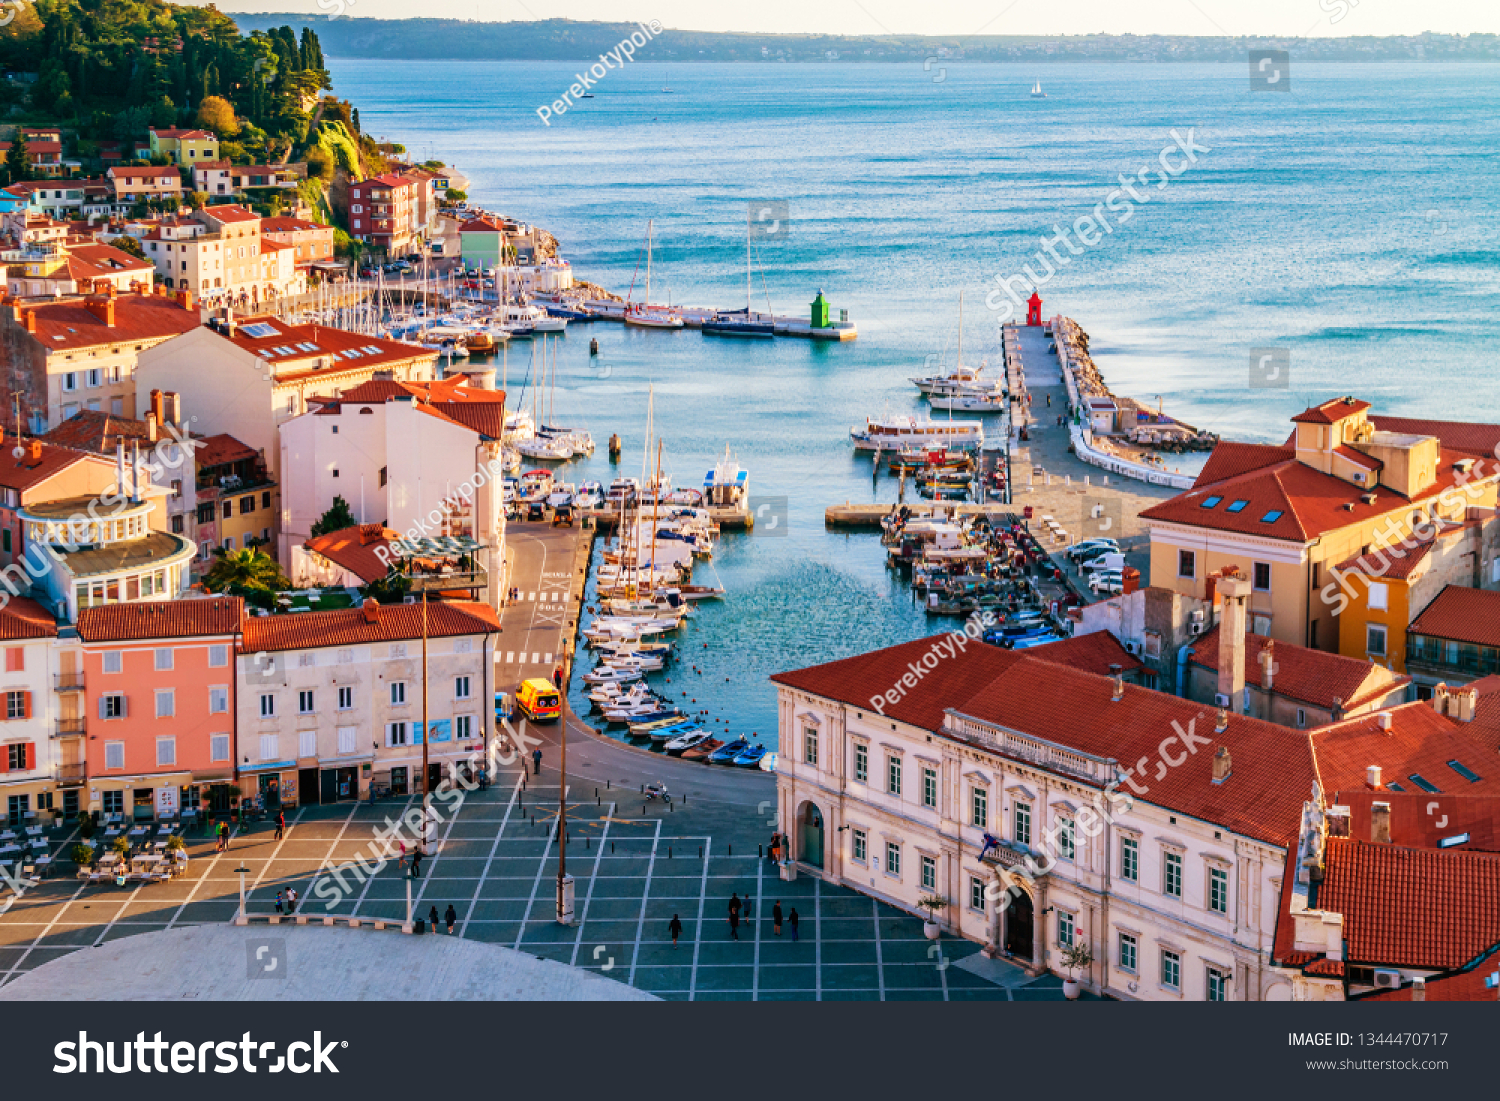 View from George's tower on Piran old town with Tartini main square and Adriatic sea. Slovenia. #1344470717